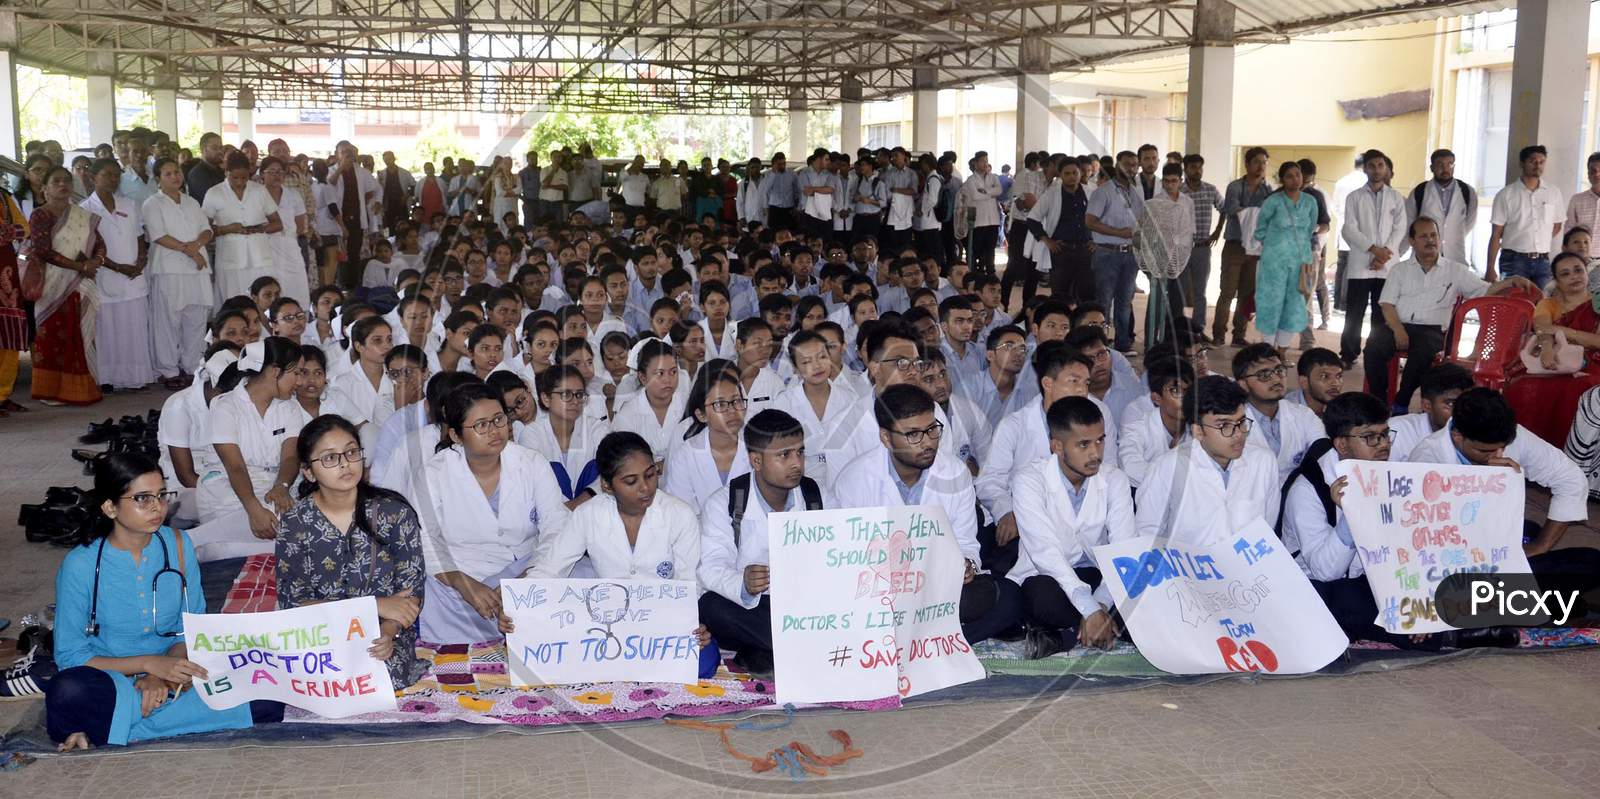 Guwahati Medical College Students Union Along With Doctors And Nurses Staging A Protest Demonstration Demanding Justice Of A Senior Doctor Deben Dutta Was Thrashed To Death By A Tea Garden Worker'S Of  Teok Tea Estate In Jorhat, In Guwahati On Tuesday, 03 September 2019.Photo:Hafiz Ahmed